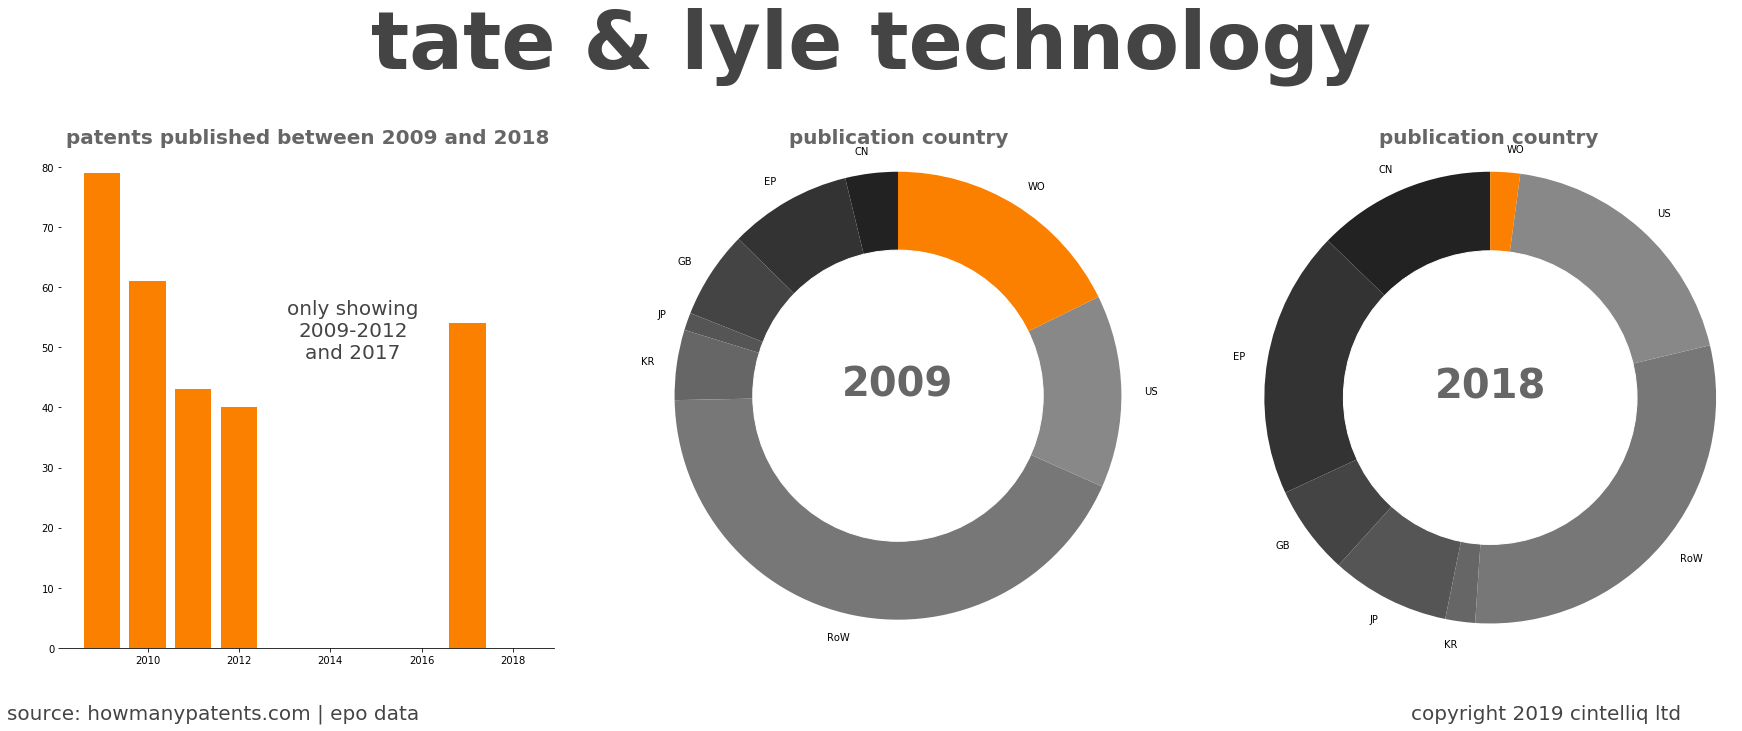 summary of patents for Tate & Lyle Technology